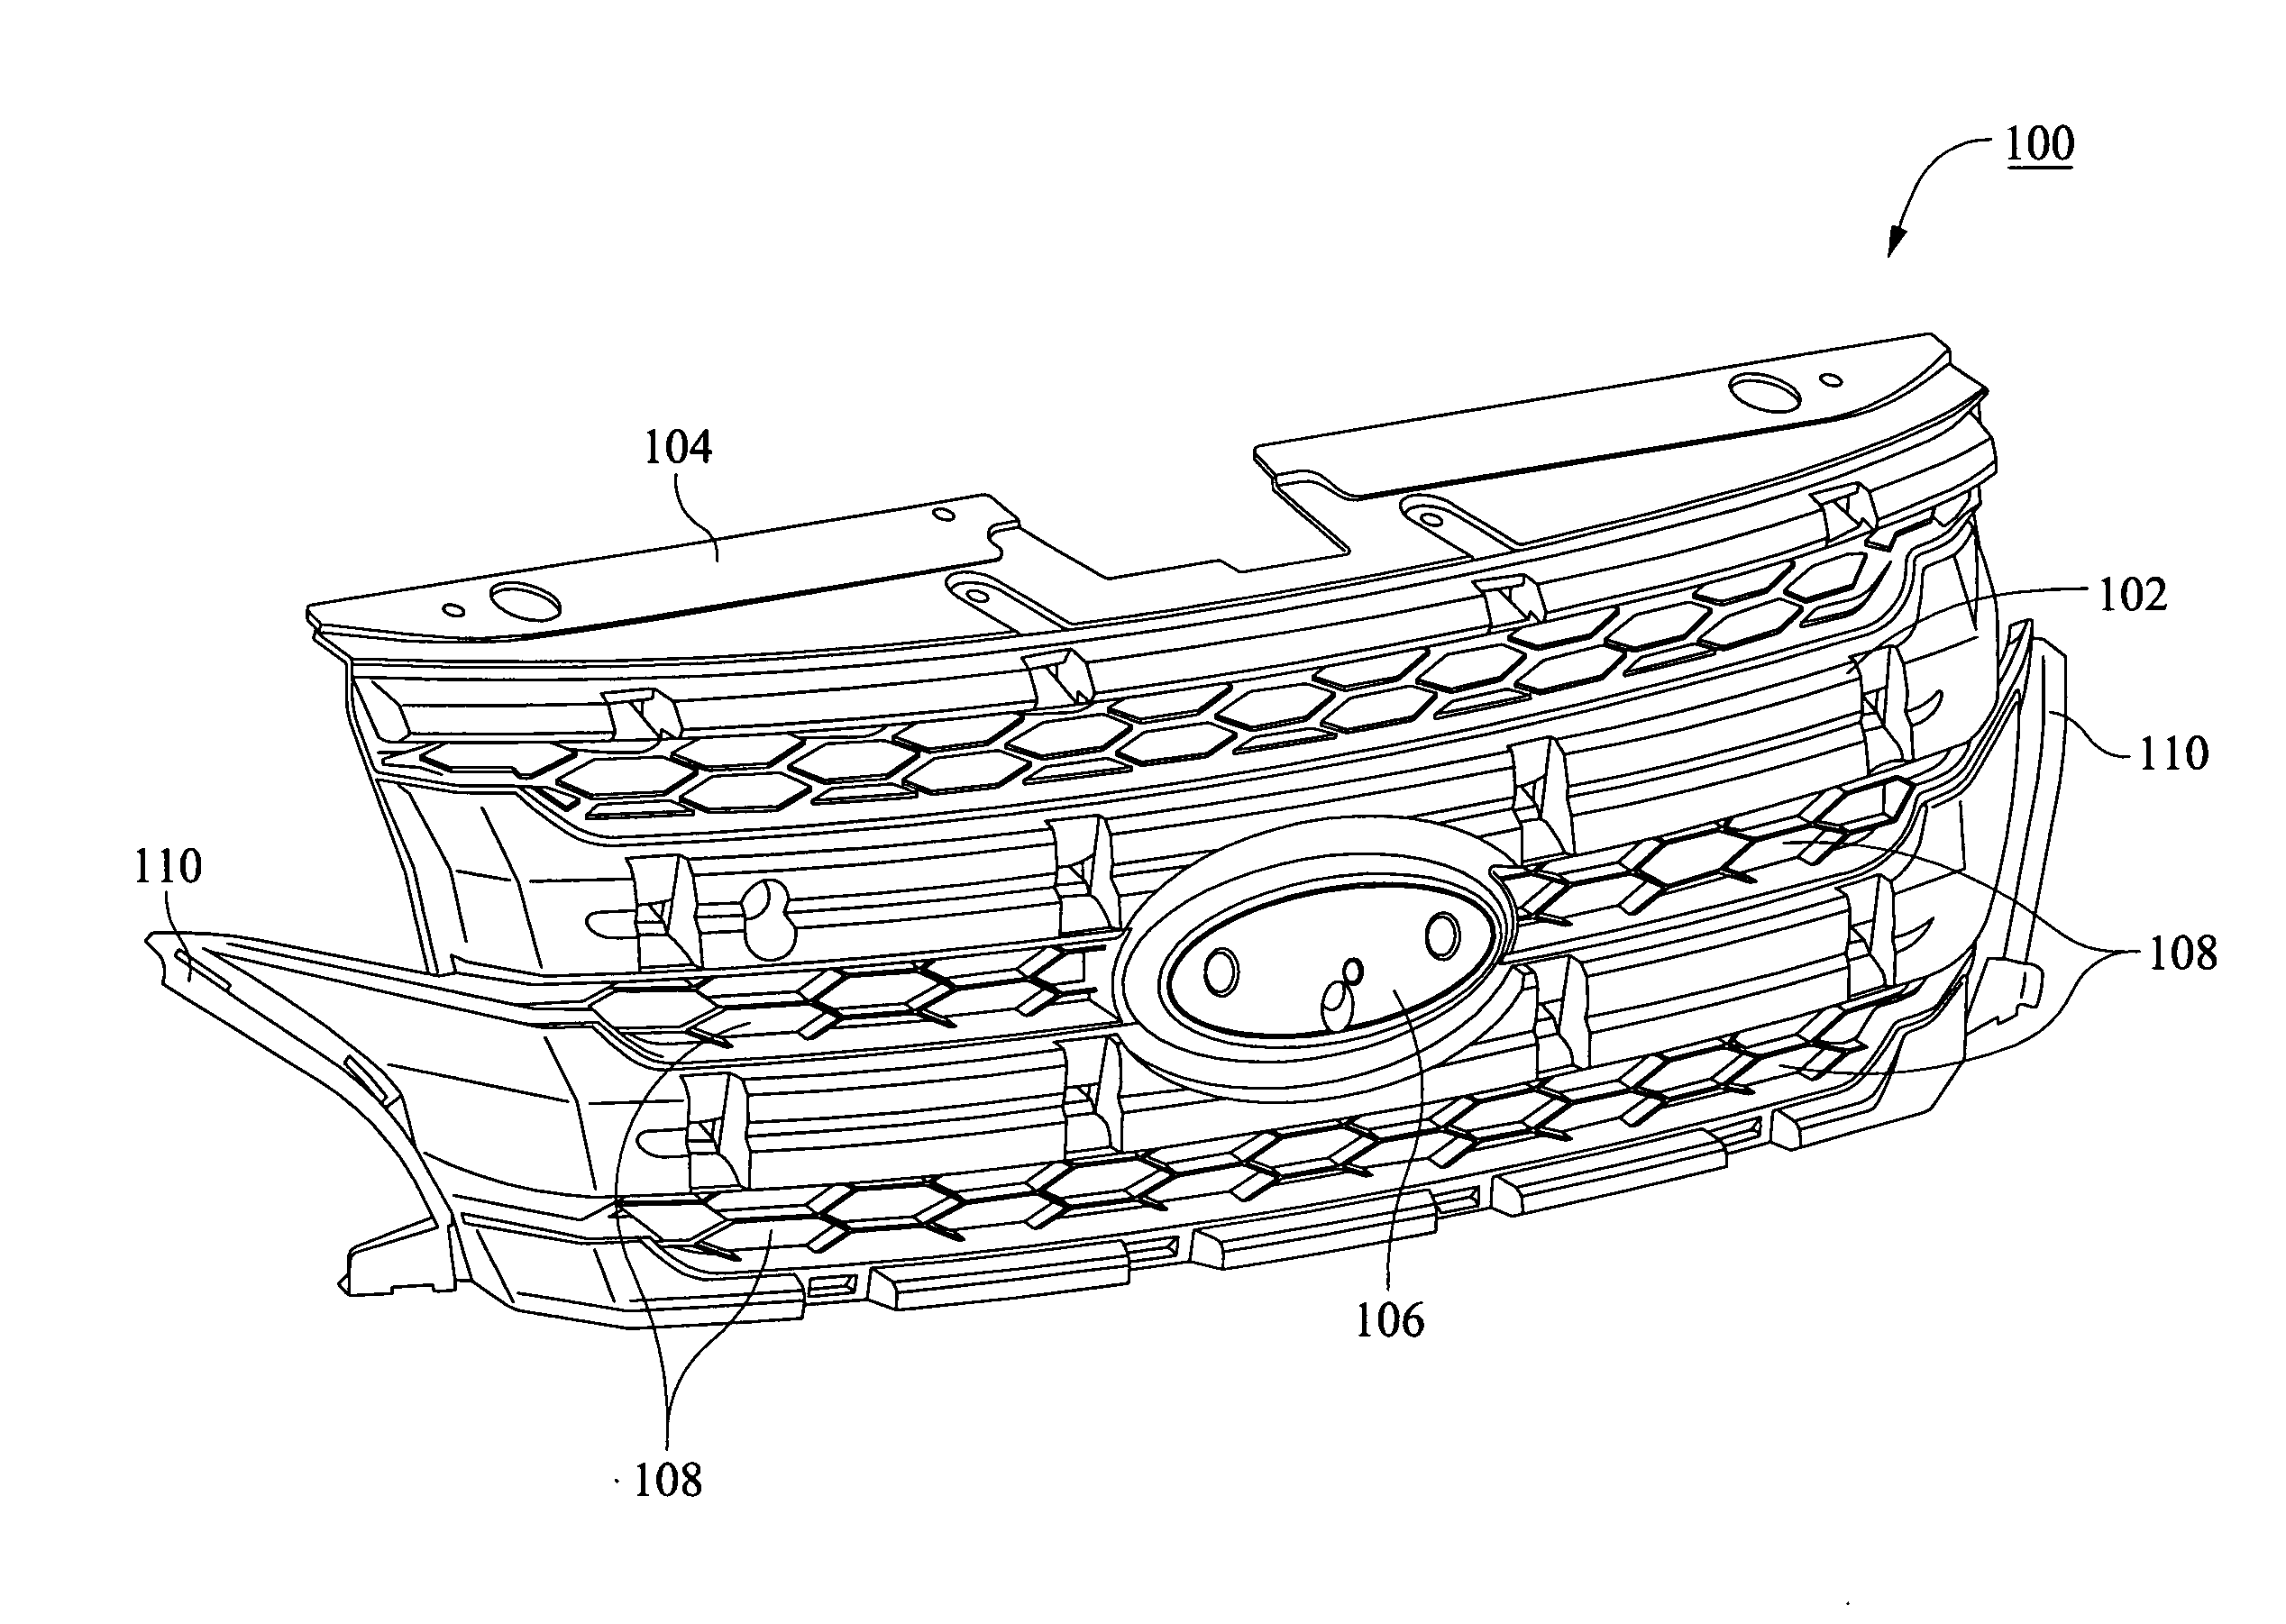 Vehicle grille including adjustable louvers, and/or method of making the same